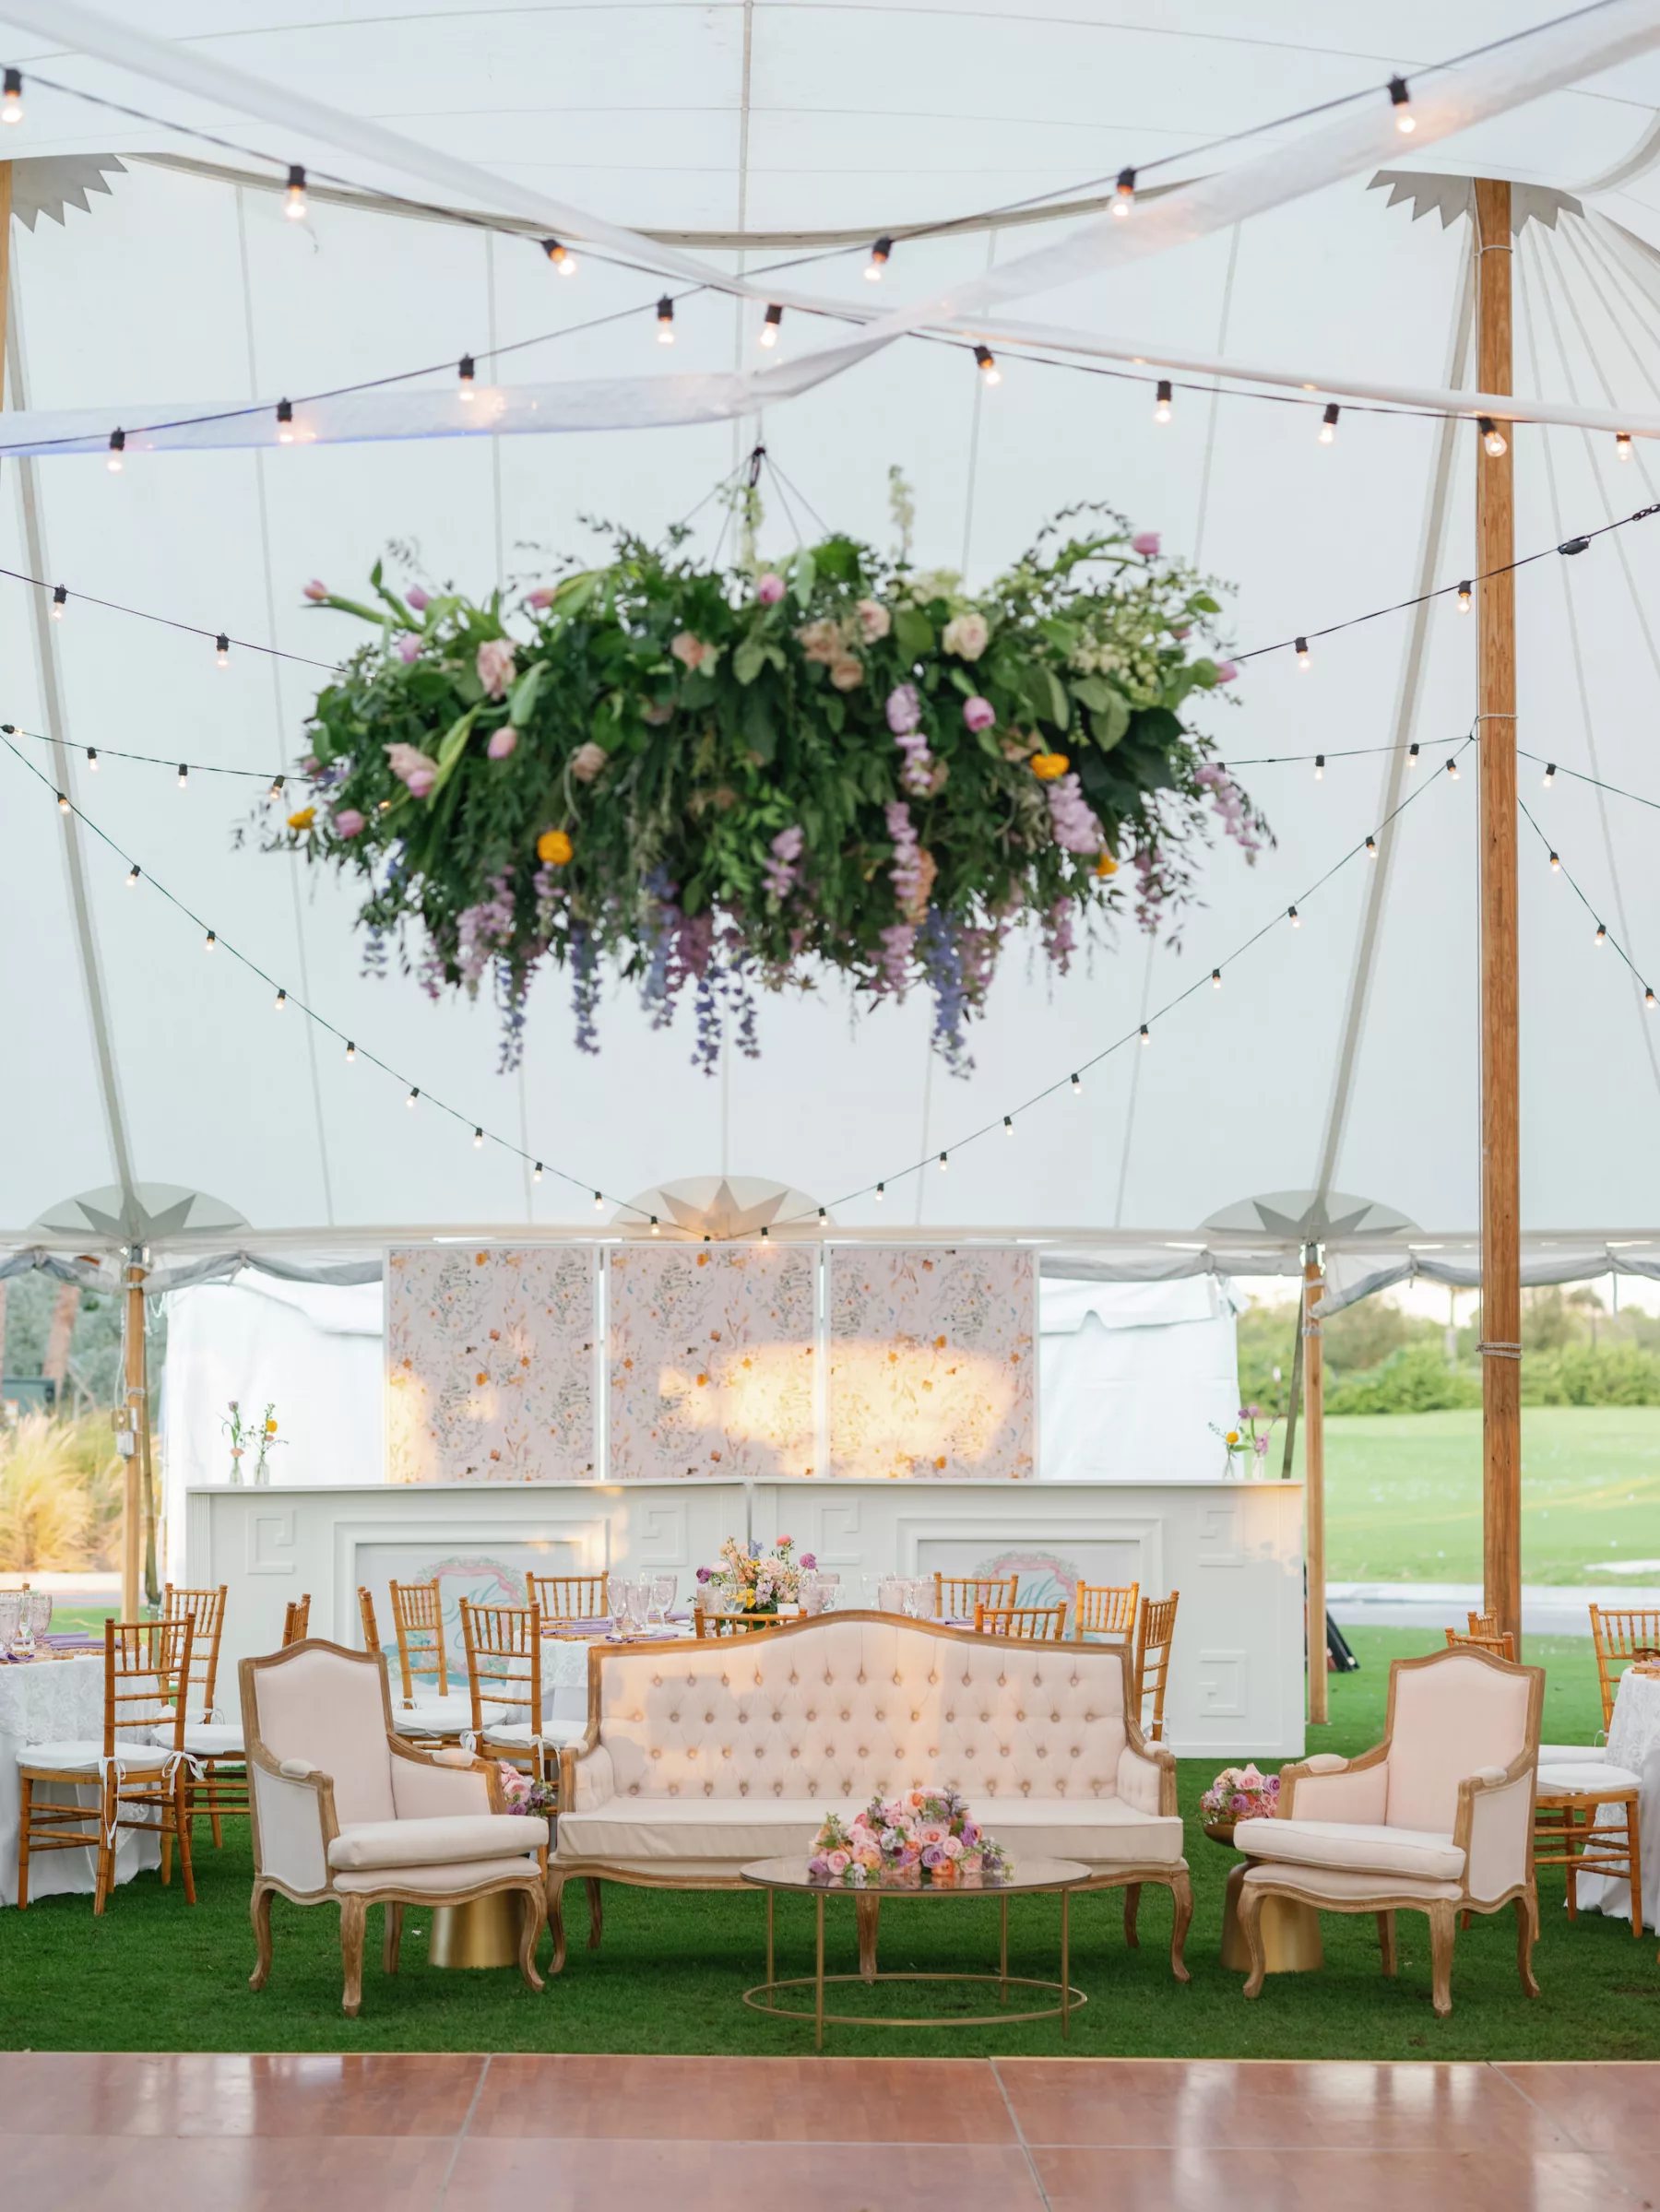 Luxurious Tented Pastel Old Florida Wedding Reception Inspiration with Vintage Lounge Seating Inspiration | Wildflower Chandelier Ideas | Sarasota Wedding Venue The Resort at Longboat Key Club